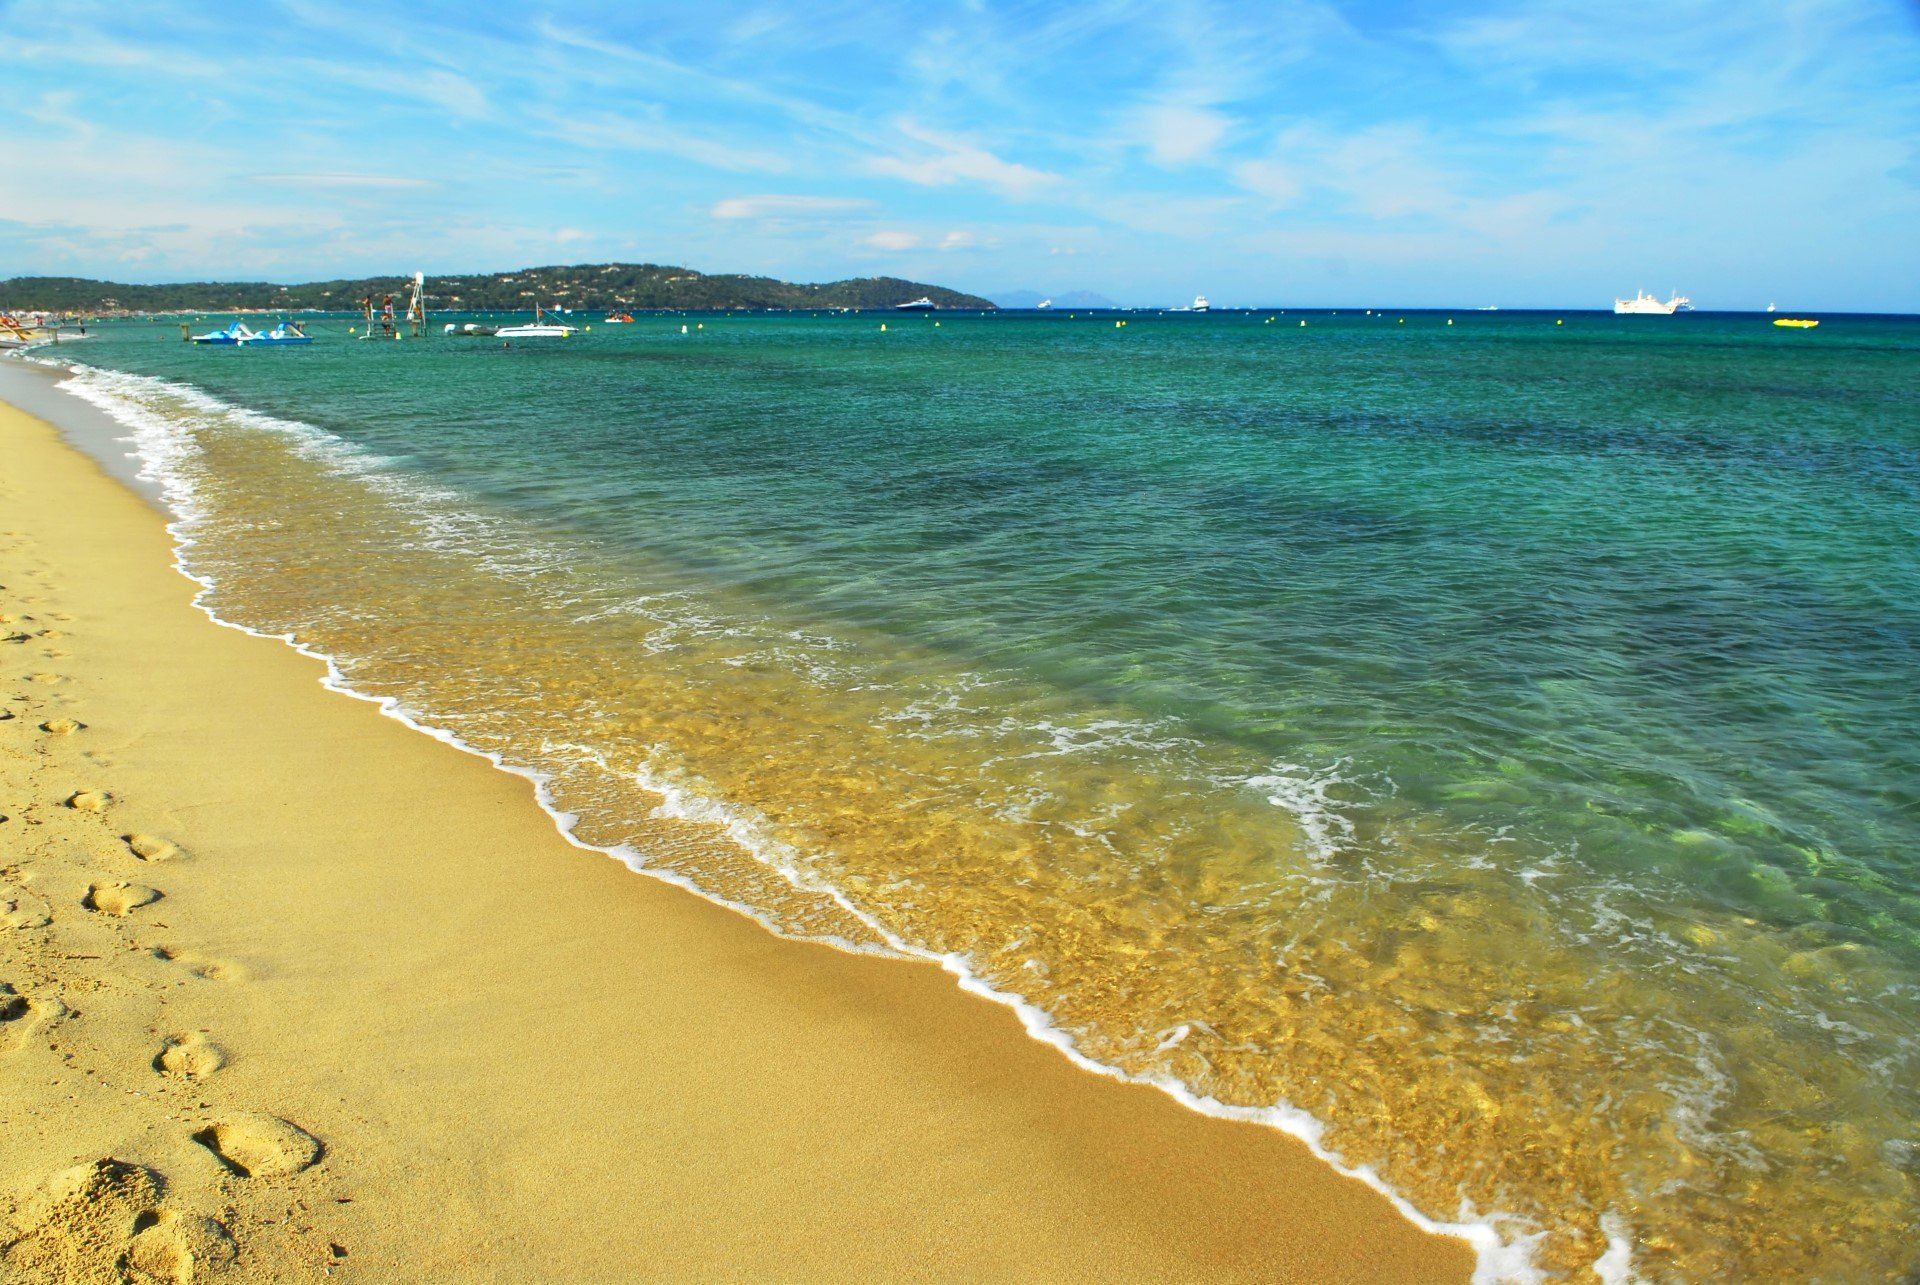 Unwind and bask in the Mediterranean sun on the golden sand beaches of St.Tropez